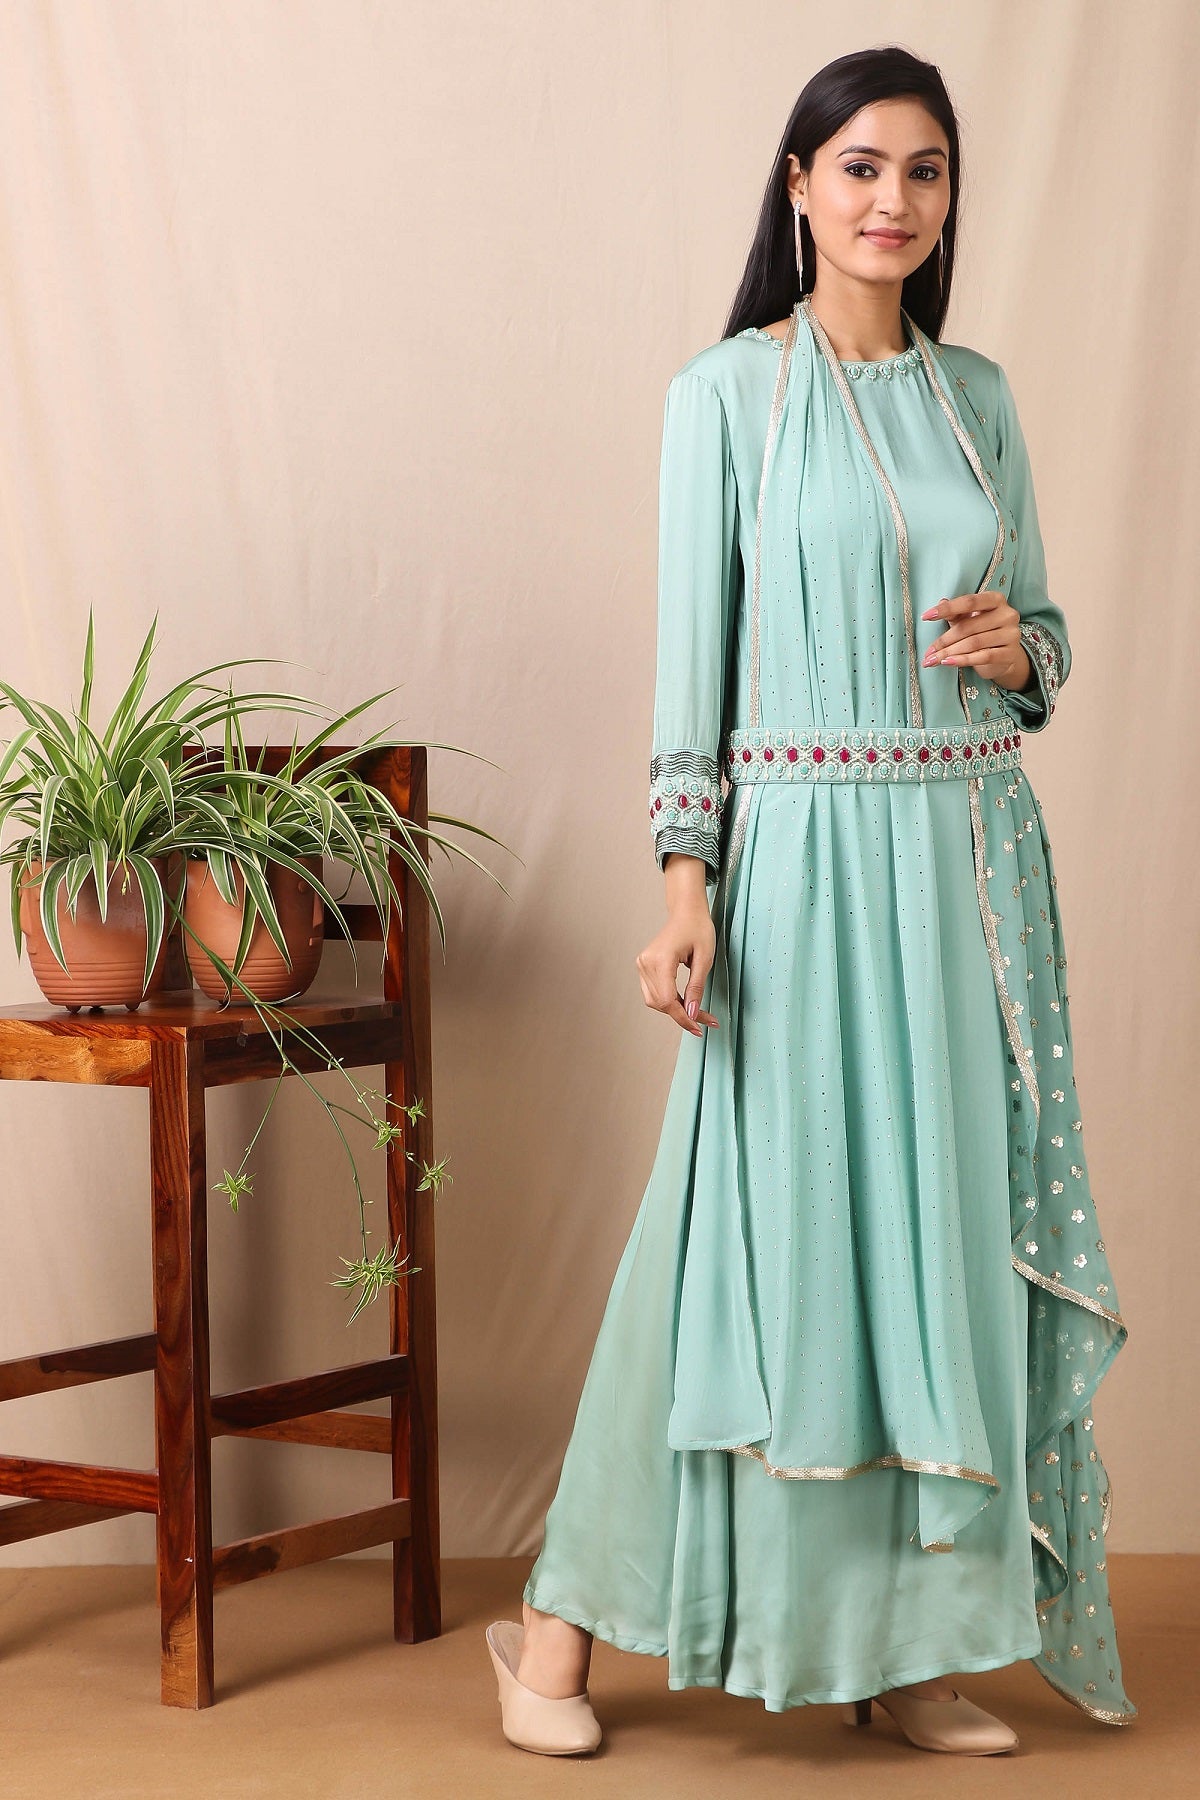 Shop this gorgeous bamberg satin embroidered dress in teel blue color with georgette dupatta featuring a beautiful neckline , belt and cuffs with cutdana and ruby, emerald colored stones, thread embroidery work and dupatta. This beautiful satin material outfit showcases beautiful sleeves with sequin embroidery work and stone work on it and dupatta. Style this set with a pair of diamond earrings and solid pumps to finish the look from Pure Elegance Indian clothing store in USA online now.-Full view.